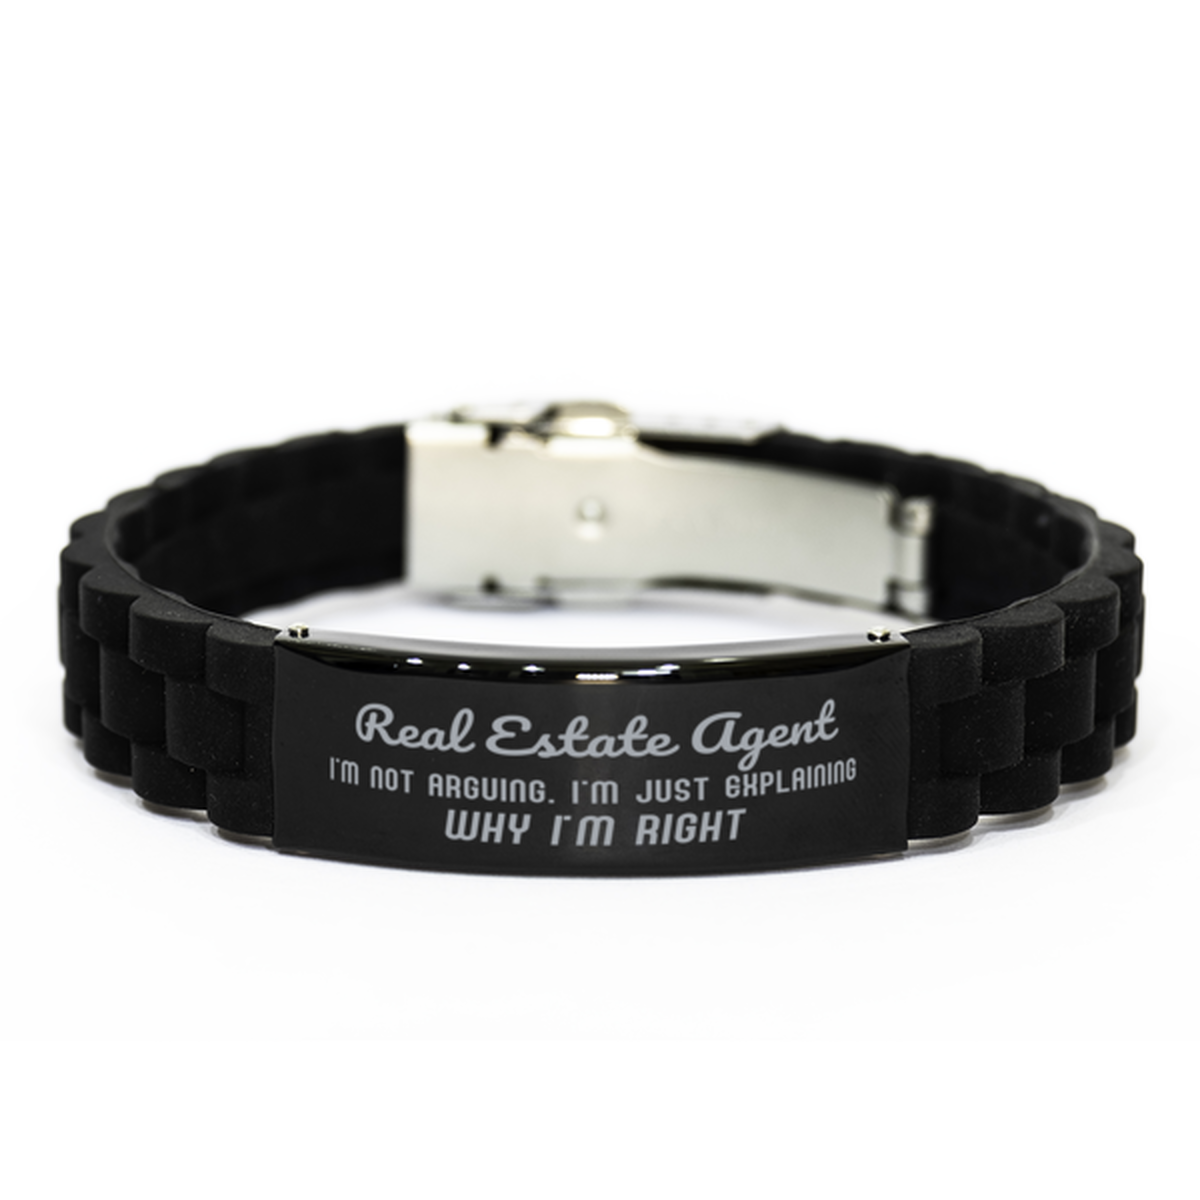 Real Estate Agent I'm not Arguing. I'm Just Explaining Why I'm RIGHT Black Glidelock Clasp Bracelet, Funny Saying Quote Real Estate Agent Gifts For Real Estate Agent Graduation Birthday Christmas Gifts for Men Women Coworker